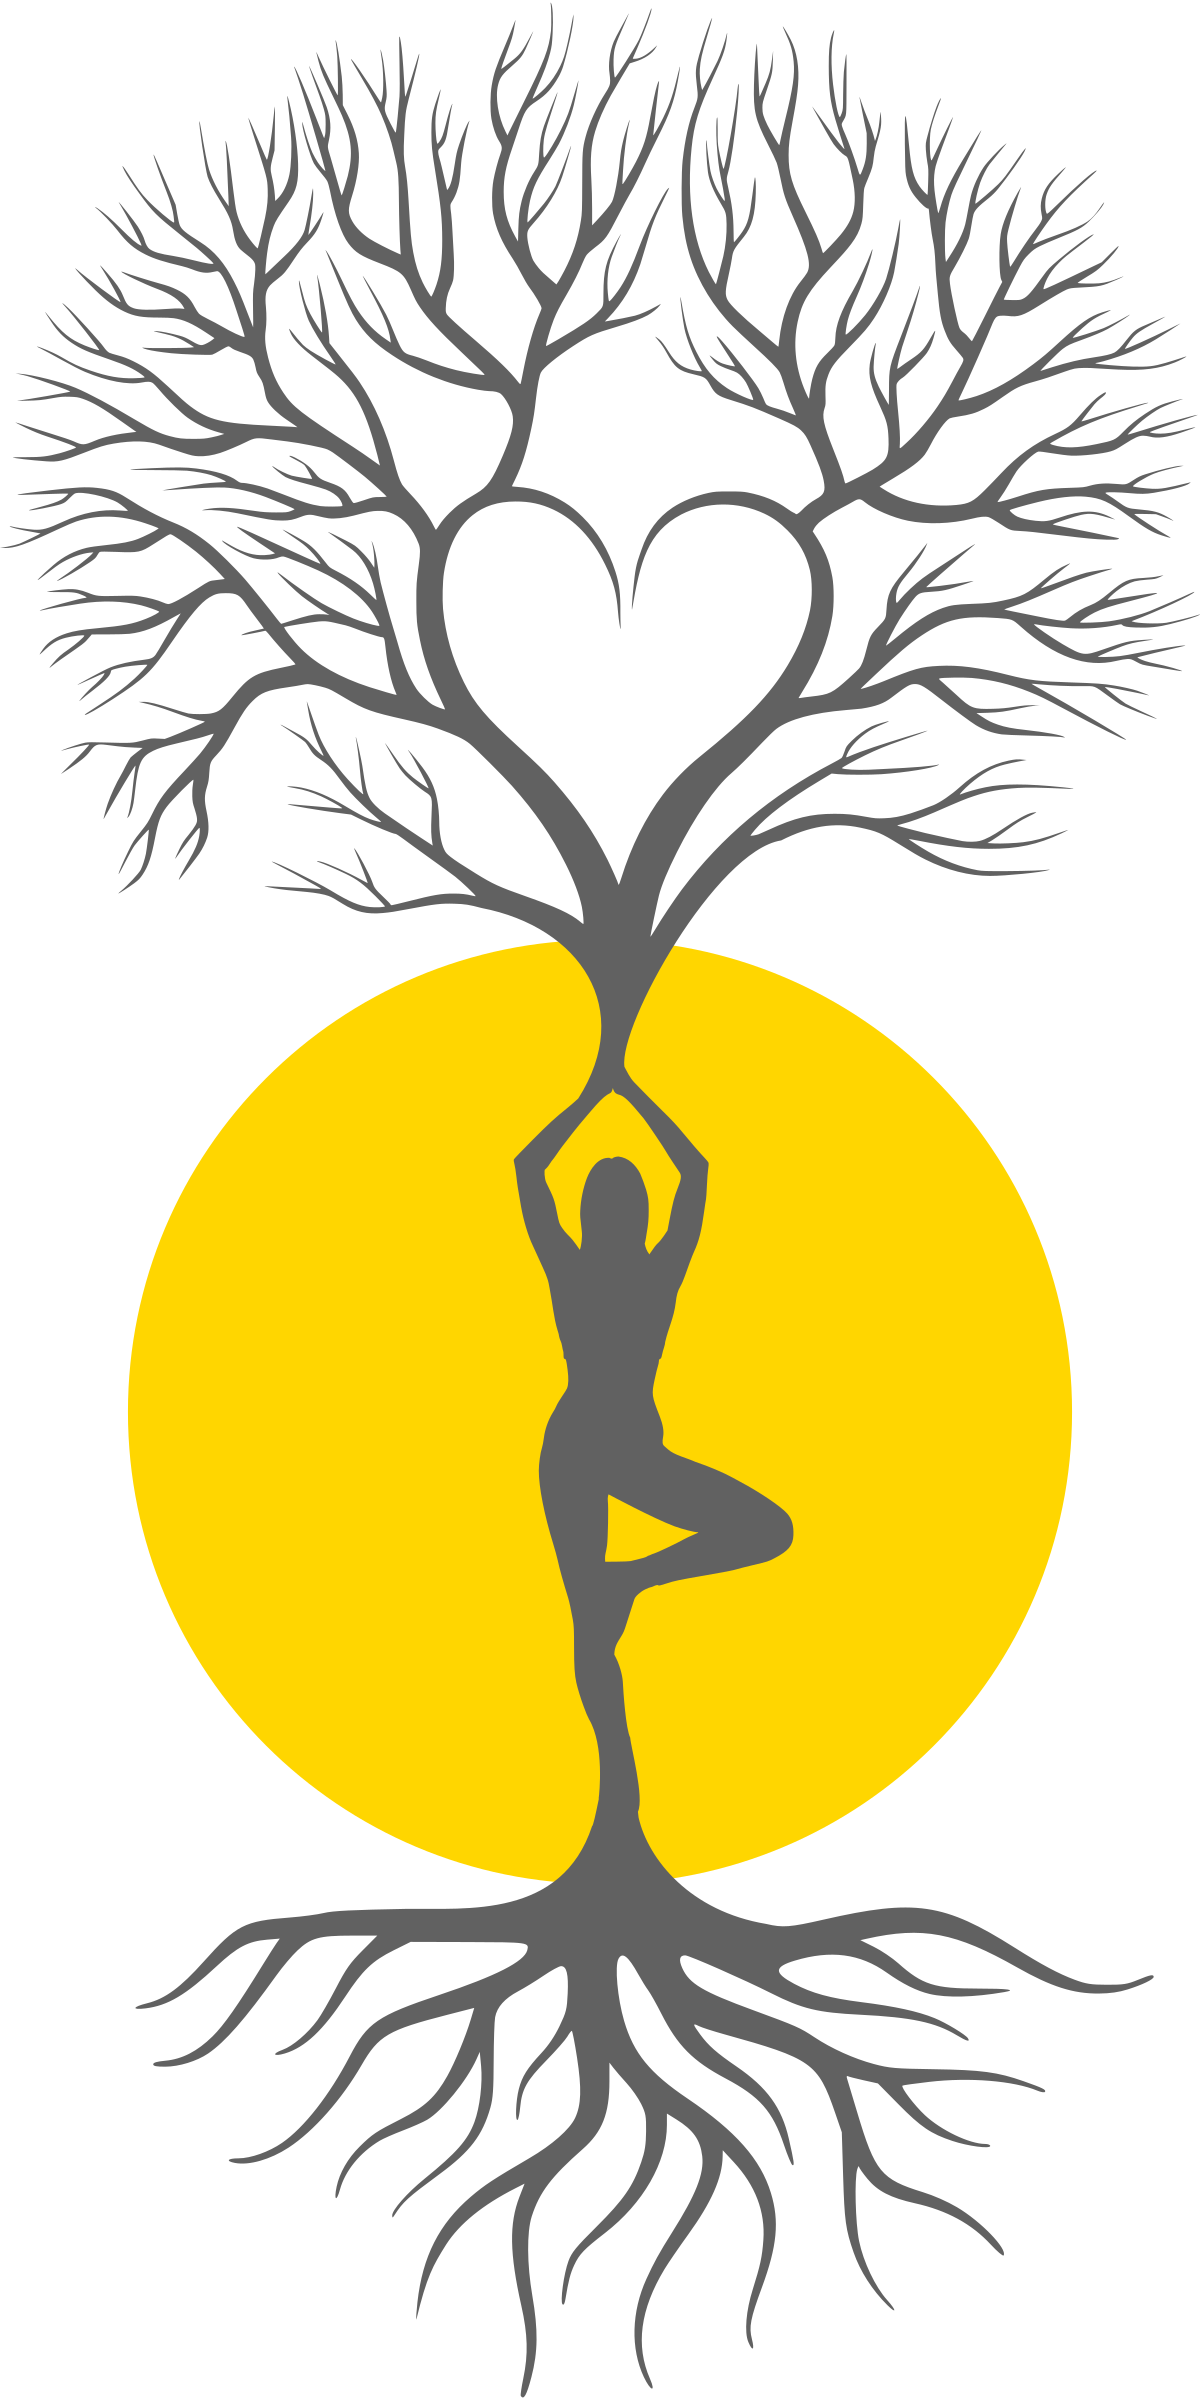 https://www.goodfreephotos.com/albums/vector-images/yoga-tree-silhouette-vector-clipart.png